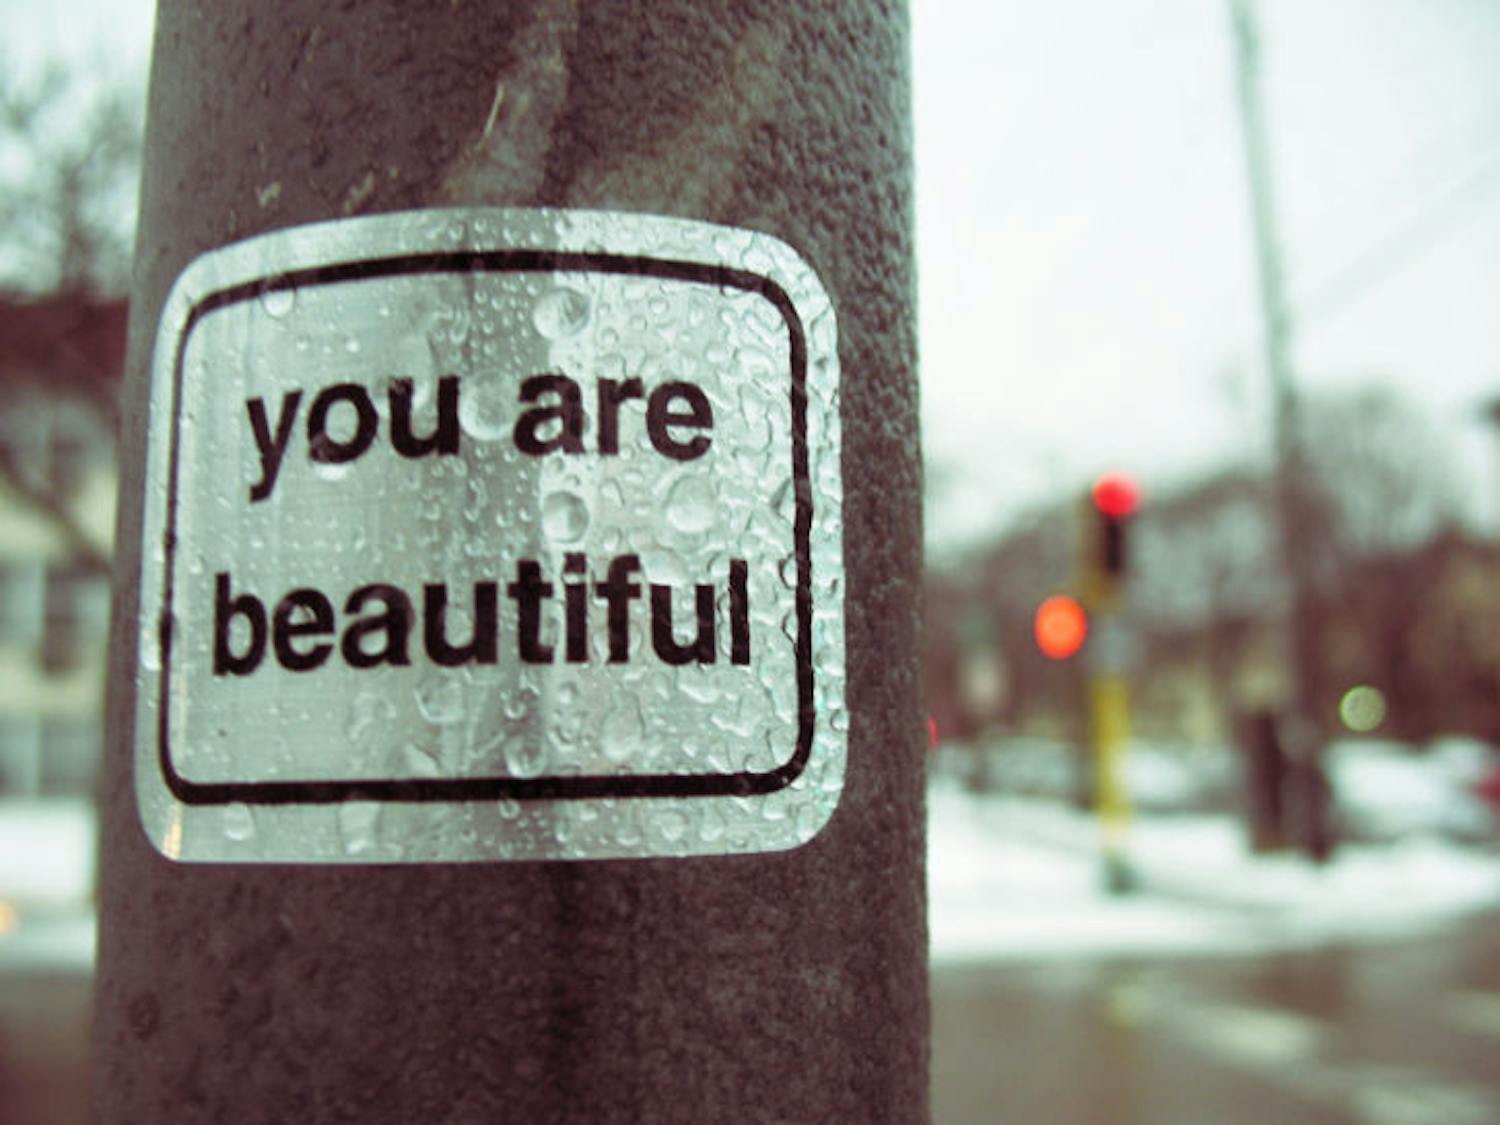 "You Are Beautiful" by Jenna, used under CC BY 2.0